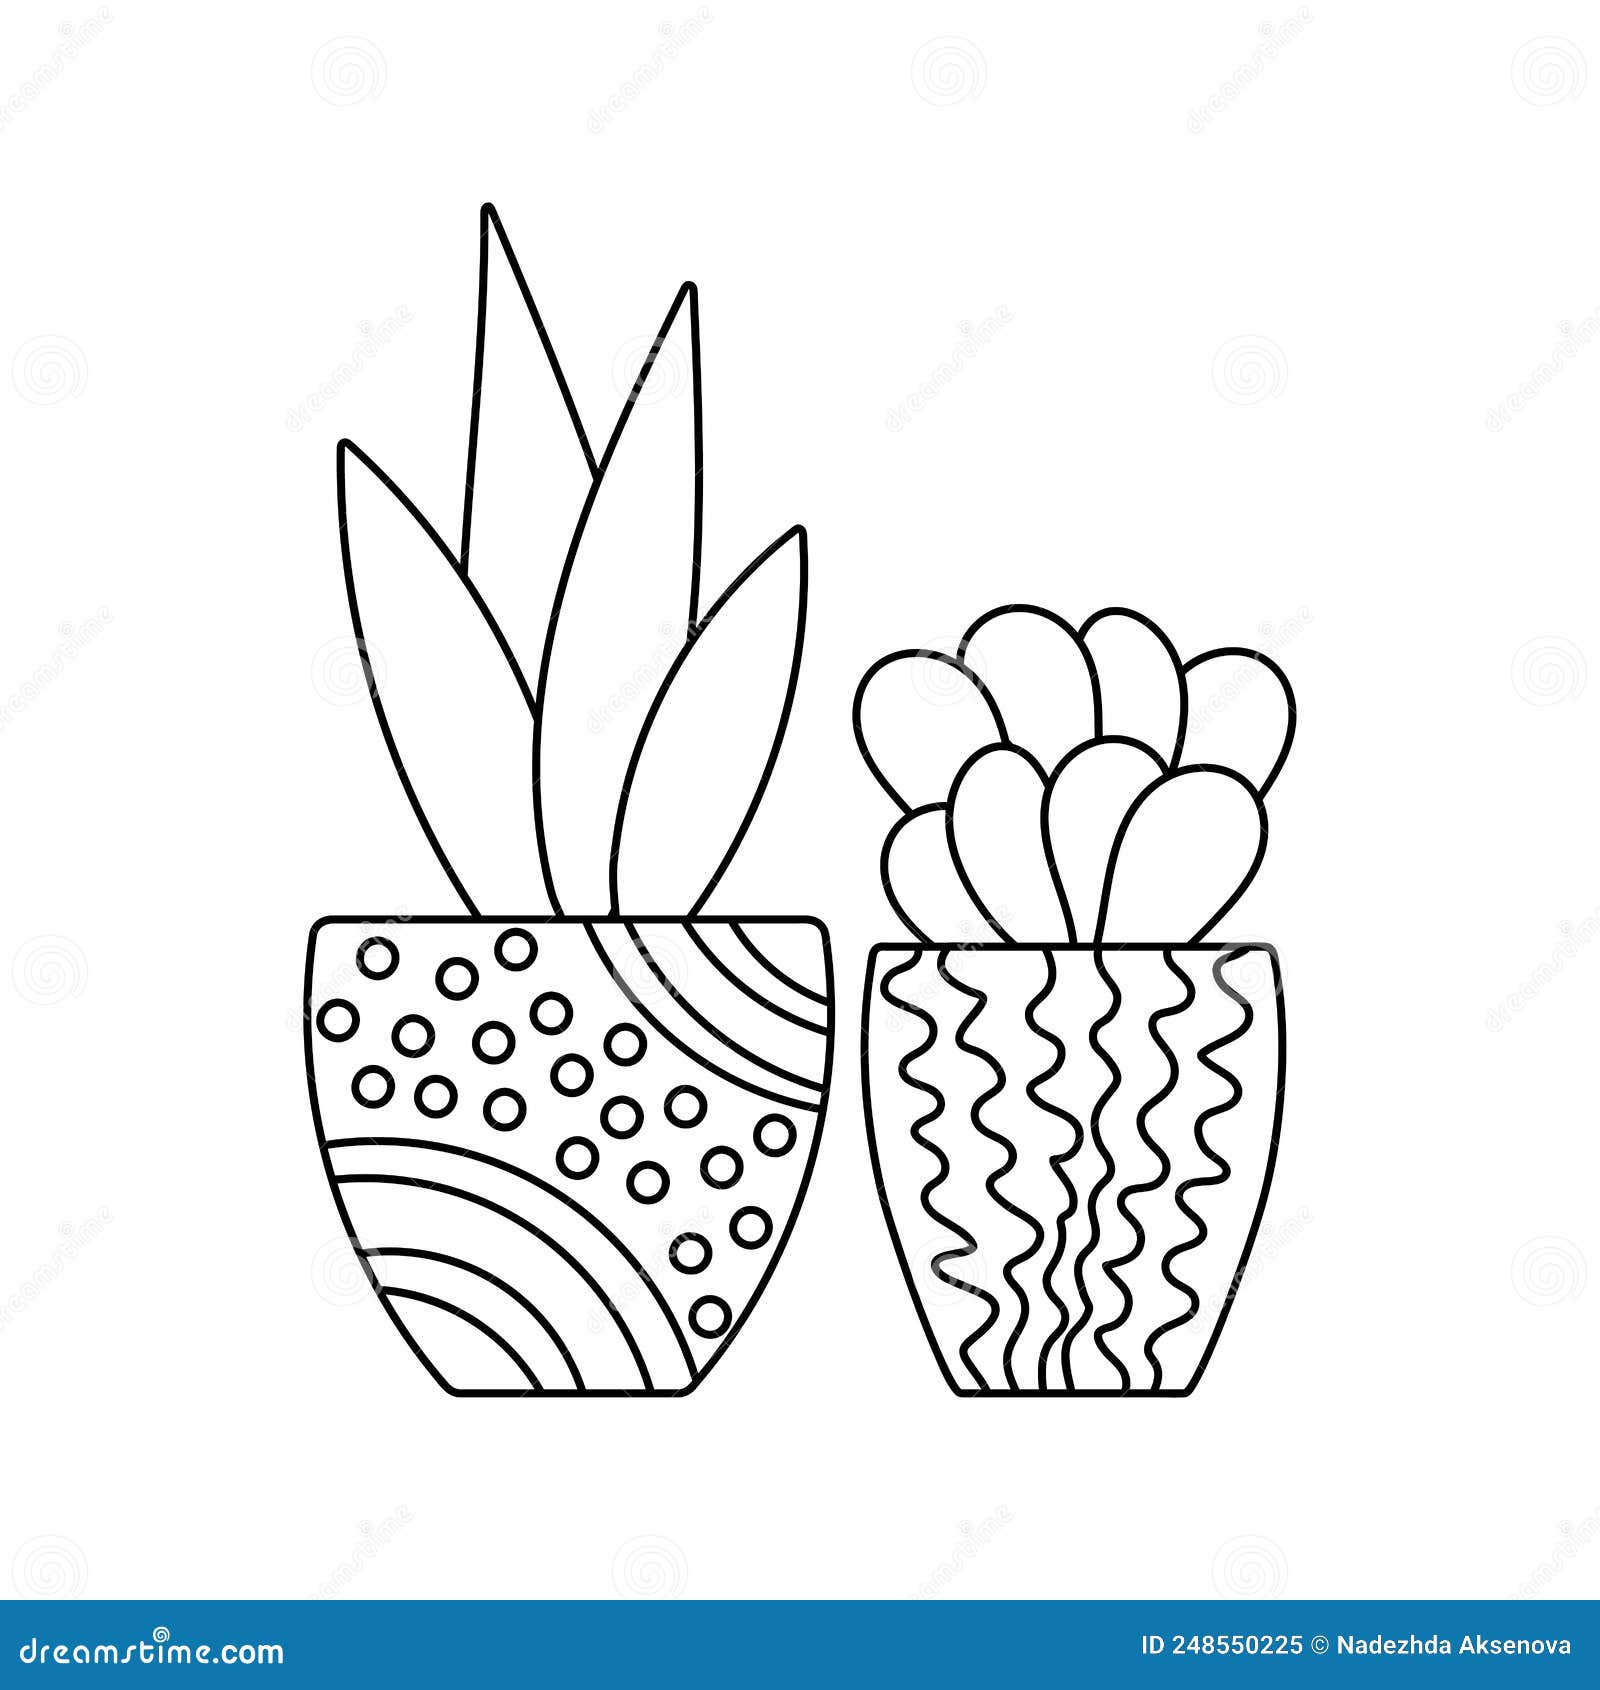 Succulent coloring book page for children house plants in pot on a white background isolated stock vector